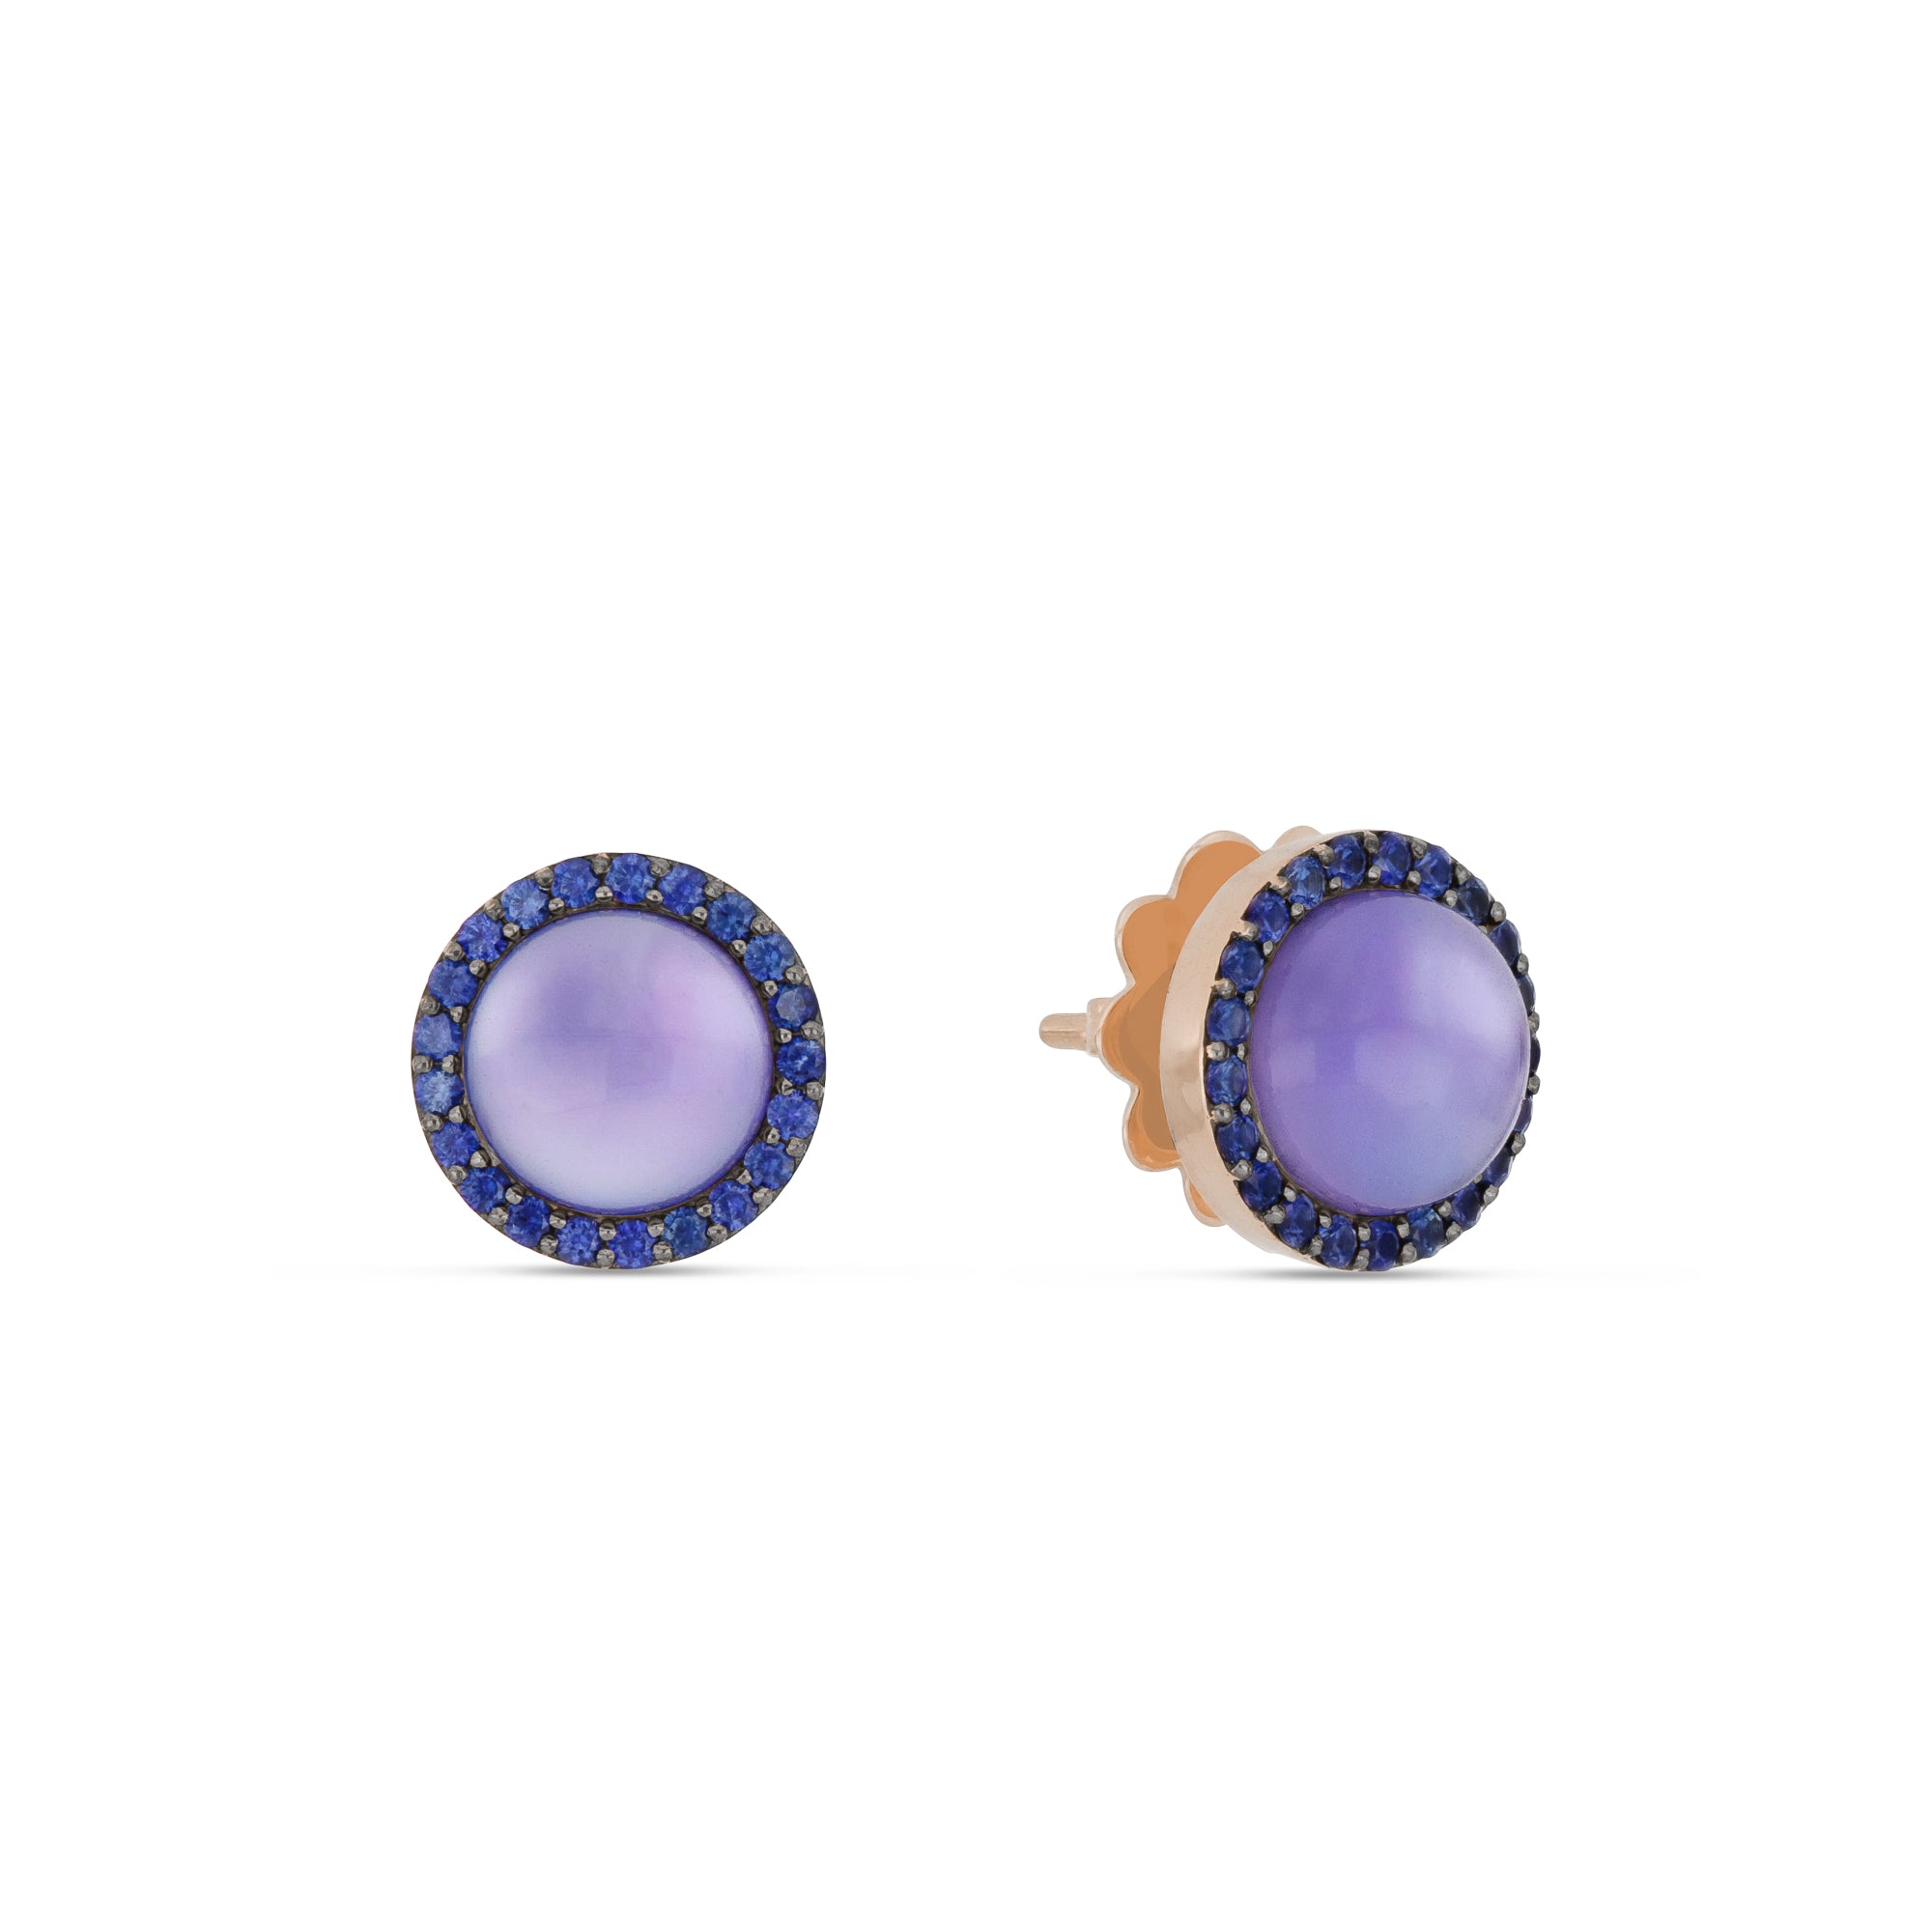 COCKTAIL EARRINGS WITH SAPPHIRES, MOTHER OF PEARL AMETHYST AND LAPIS PASTE